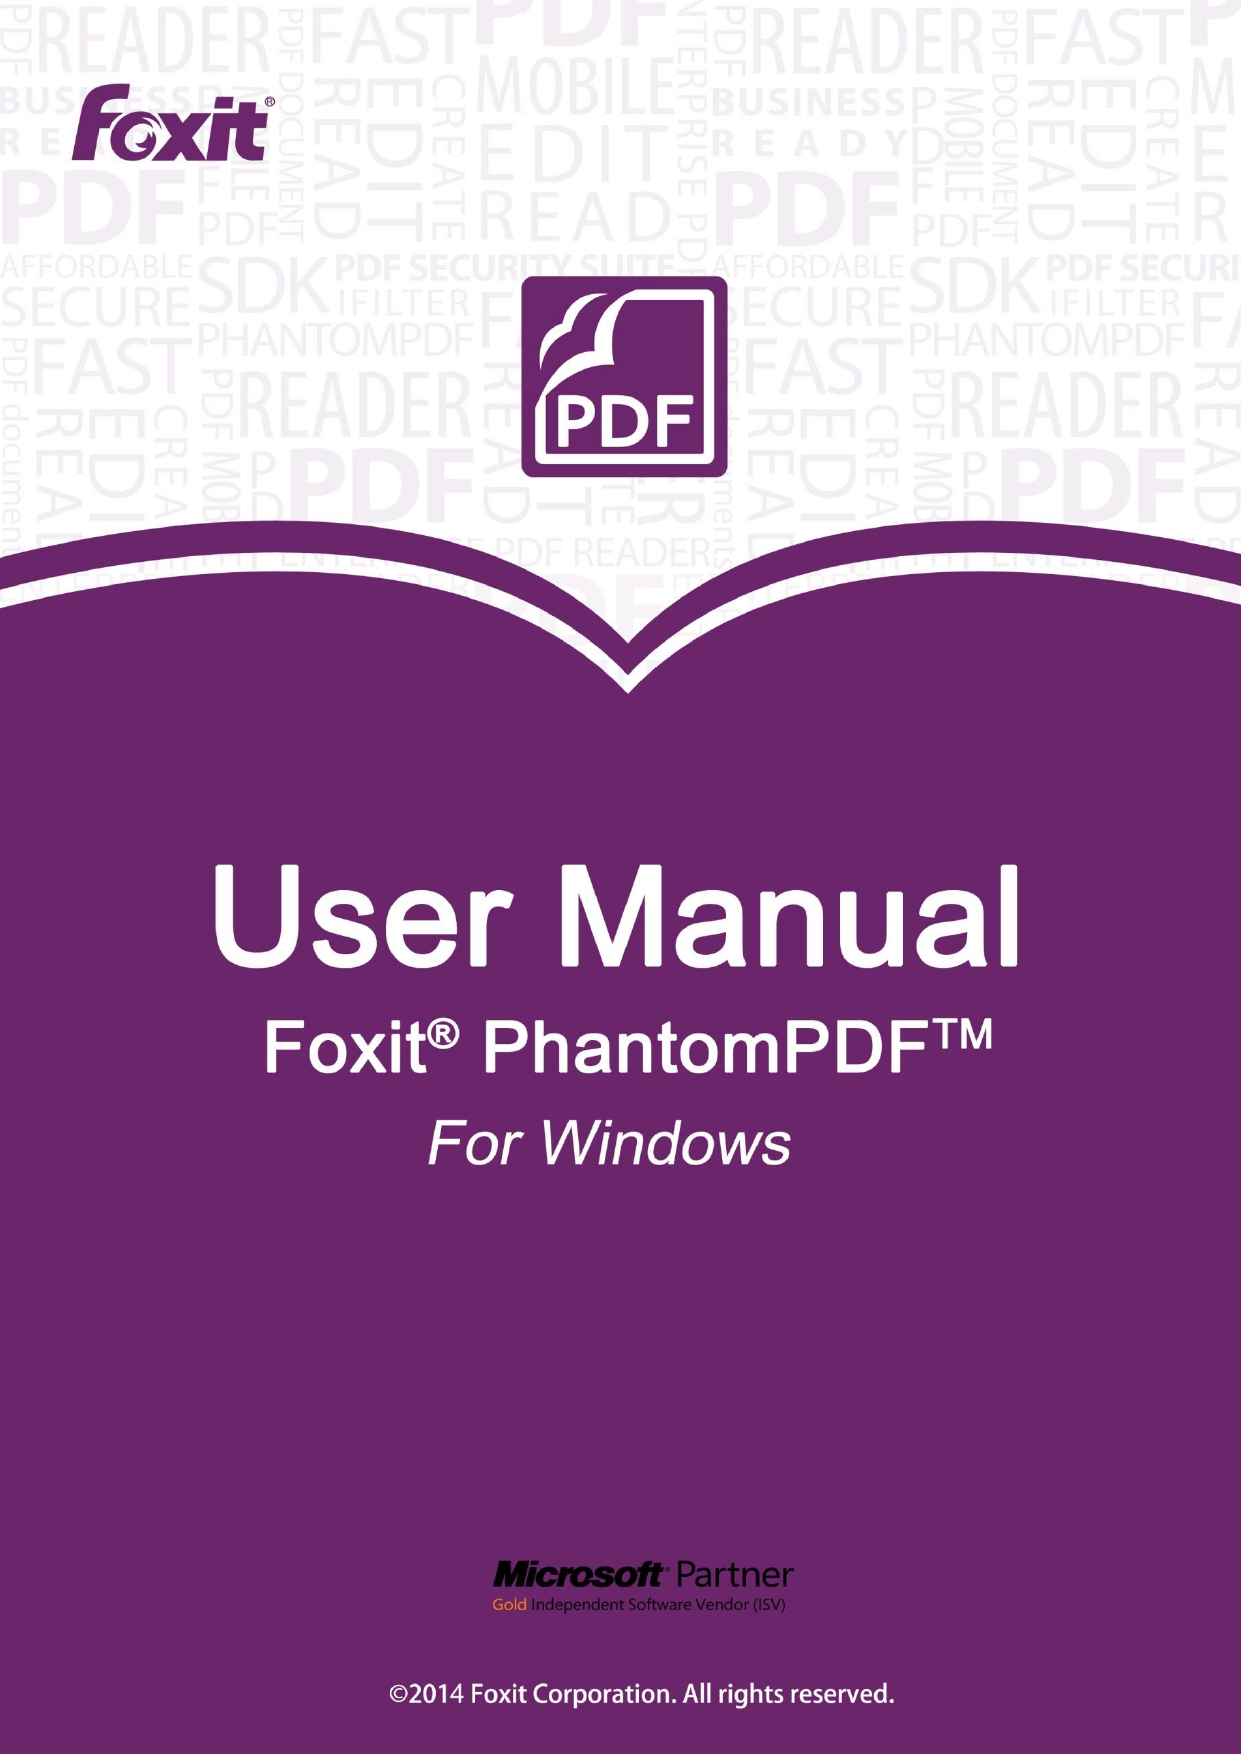 event 23 foxit reader pdf printer failed to initialize